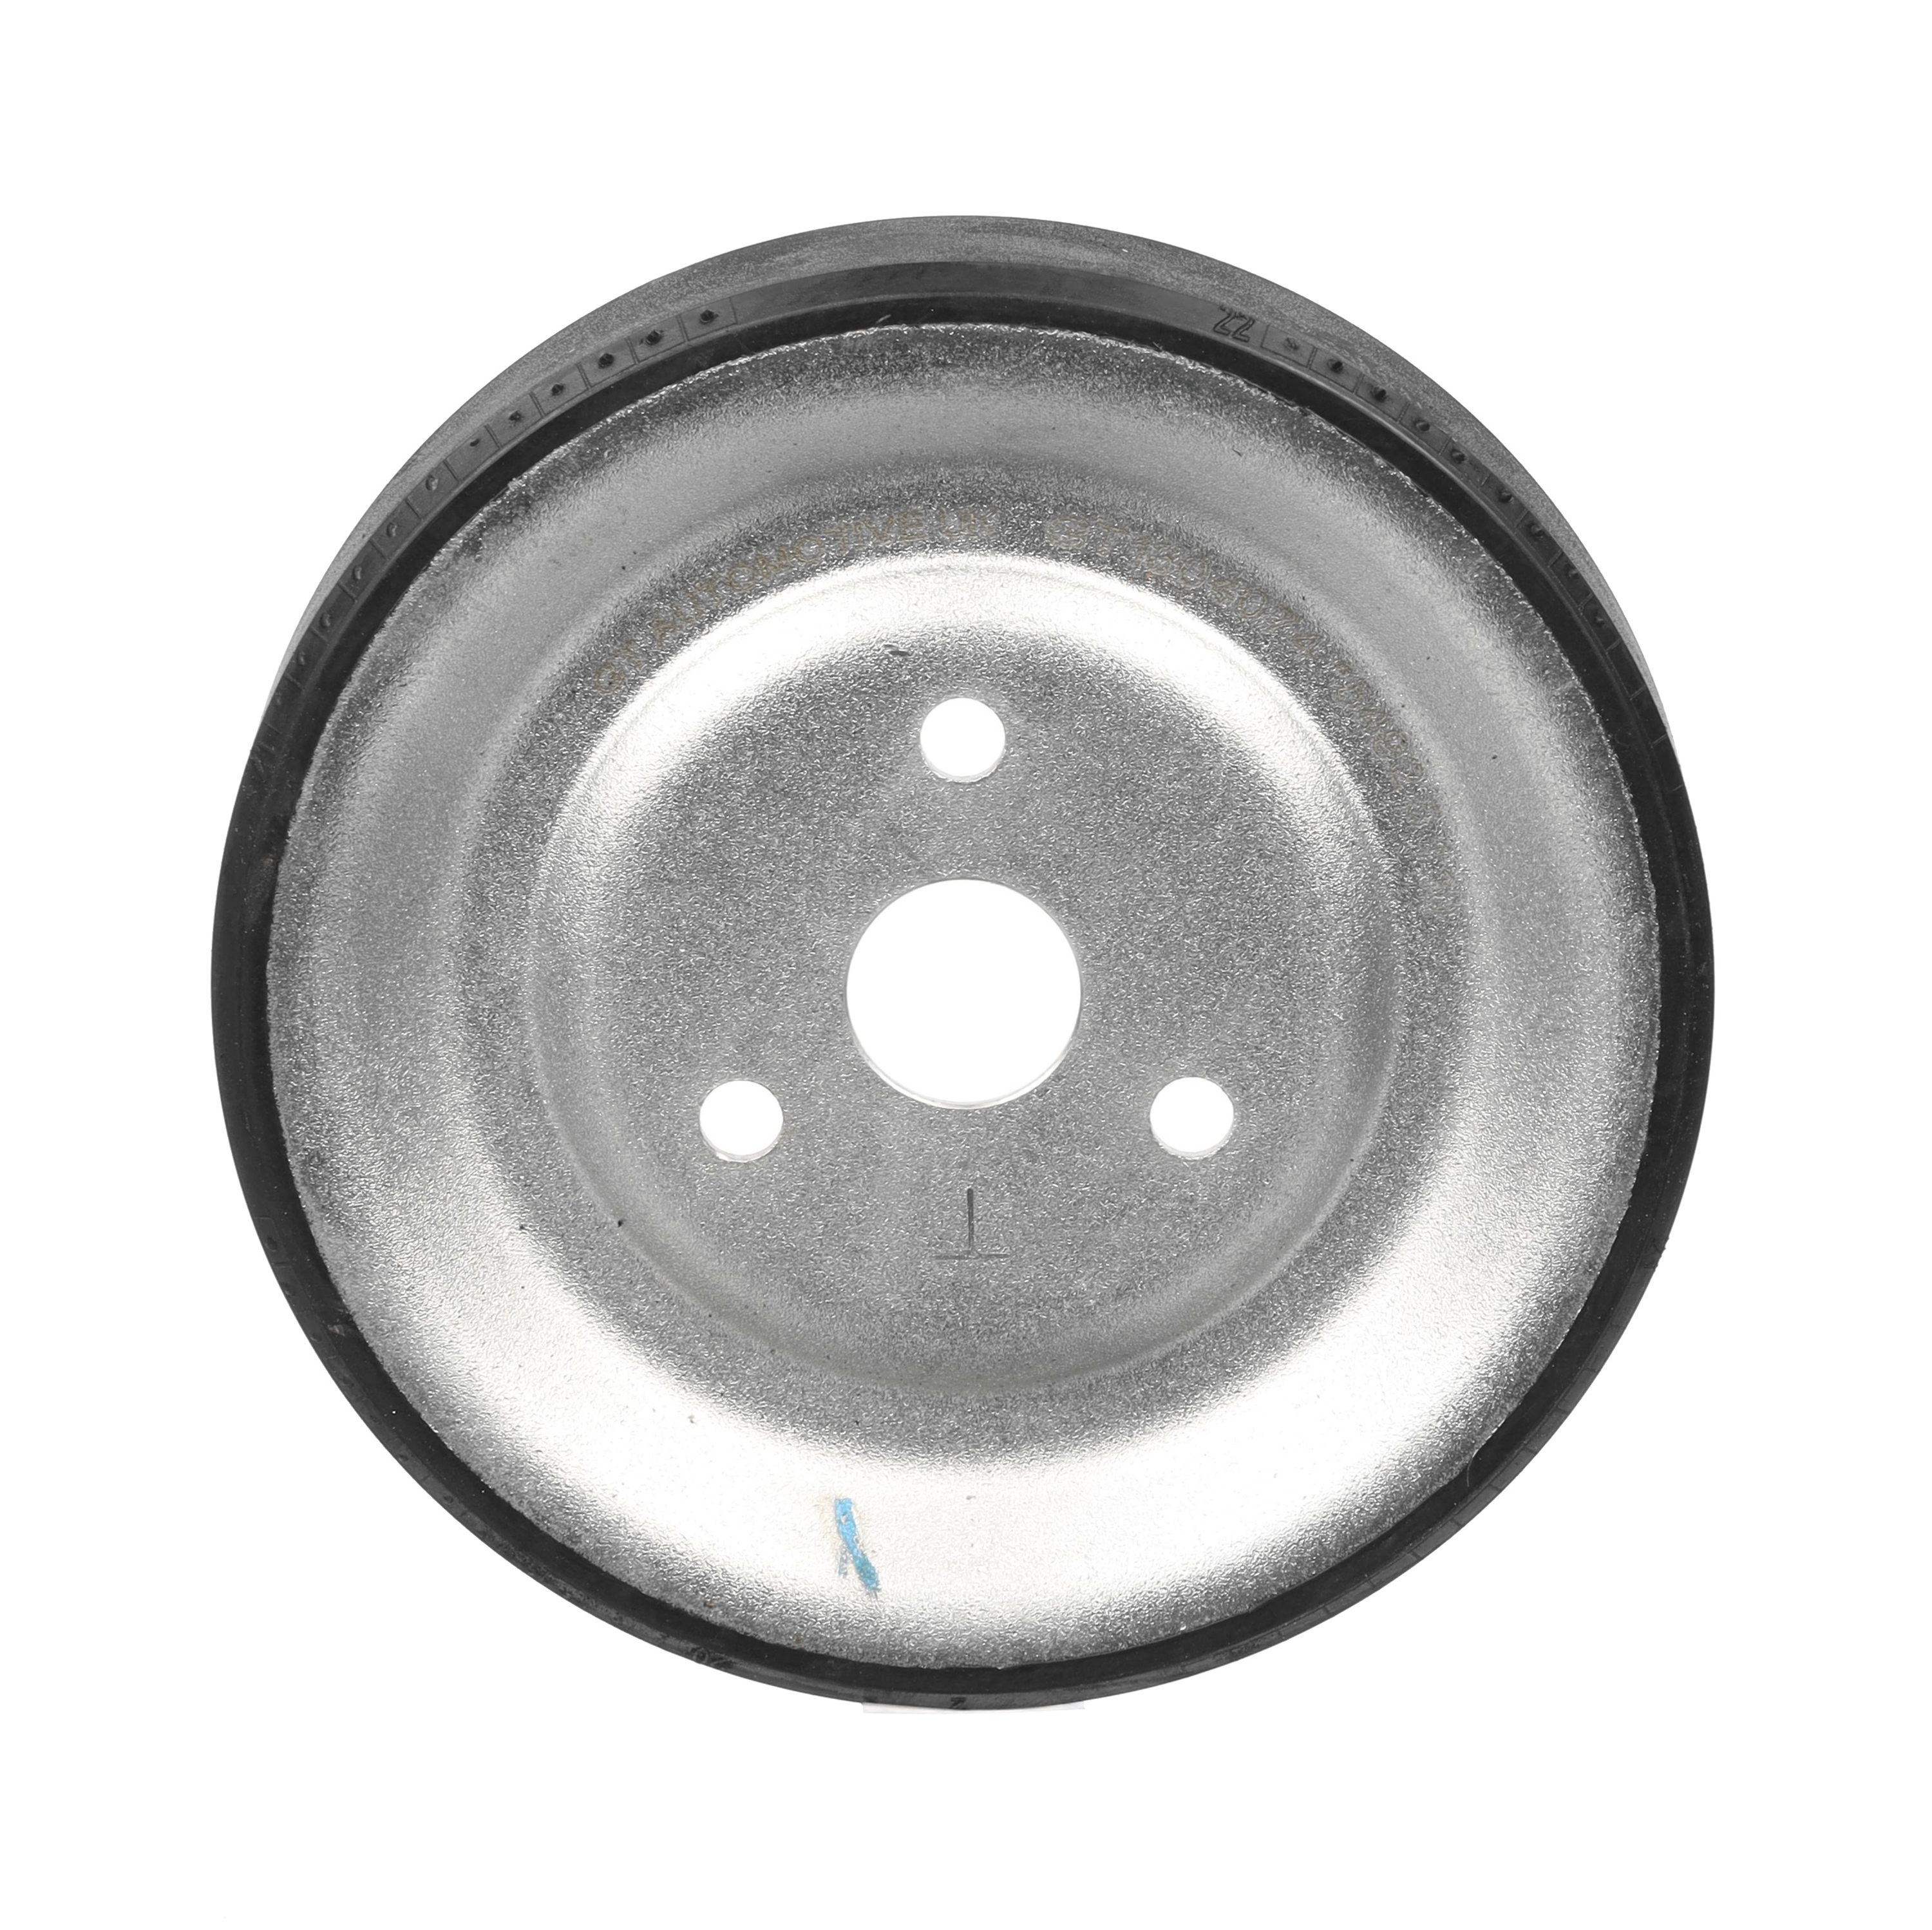 Opel Water pump pulley ET ENGINETEAM PC0023 at a good price